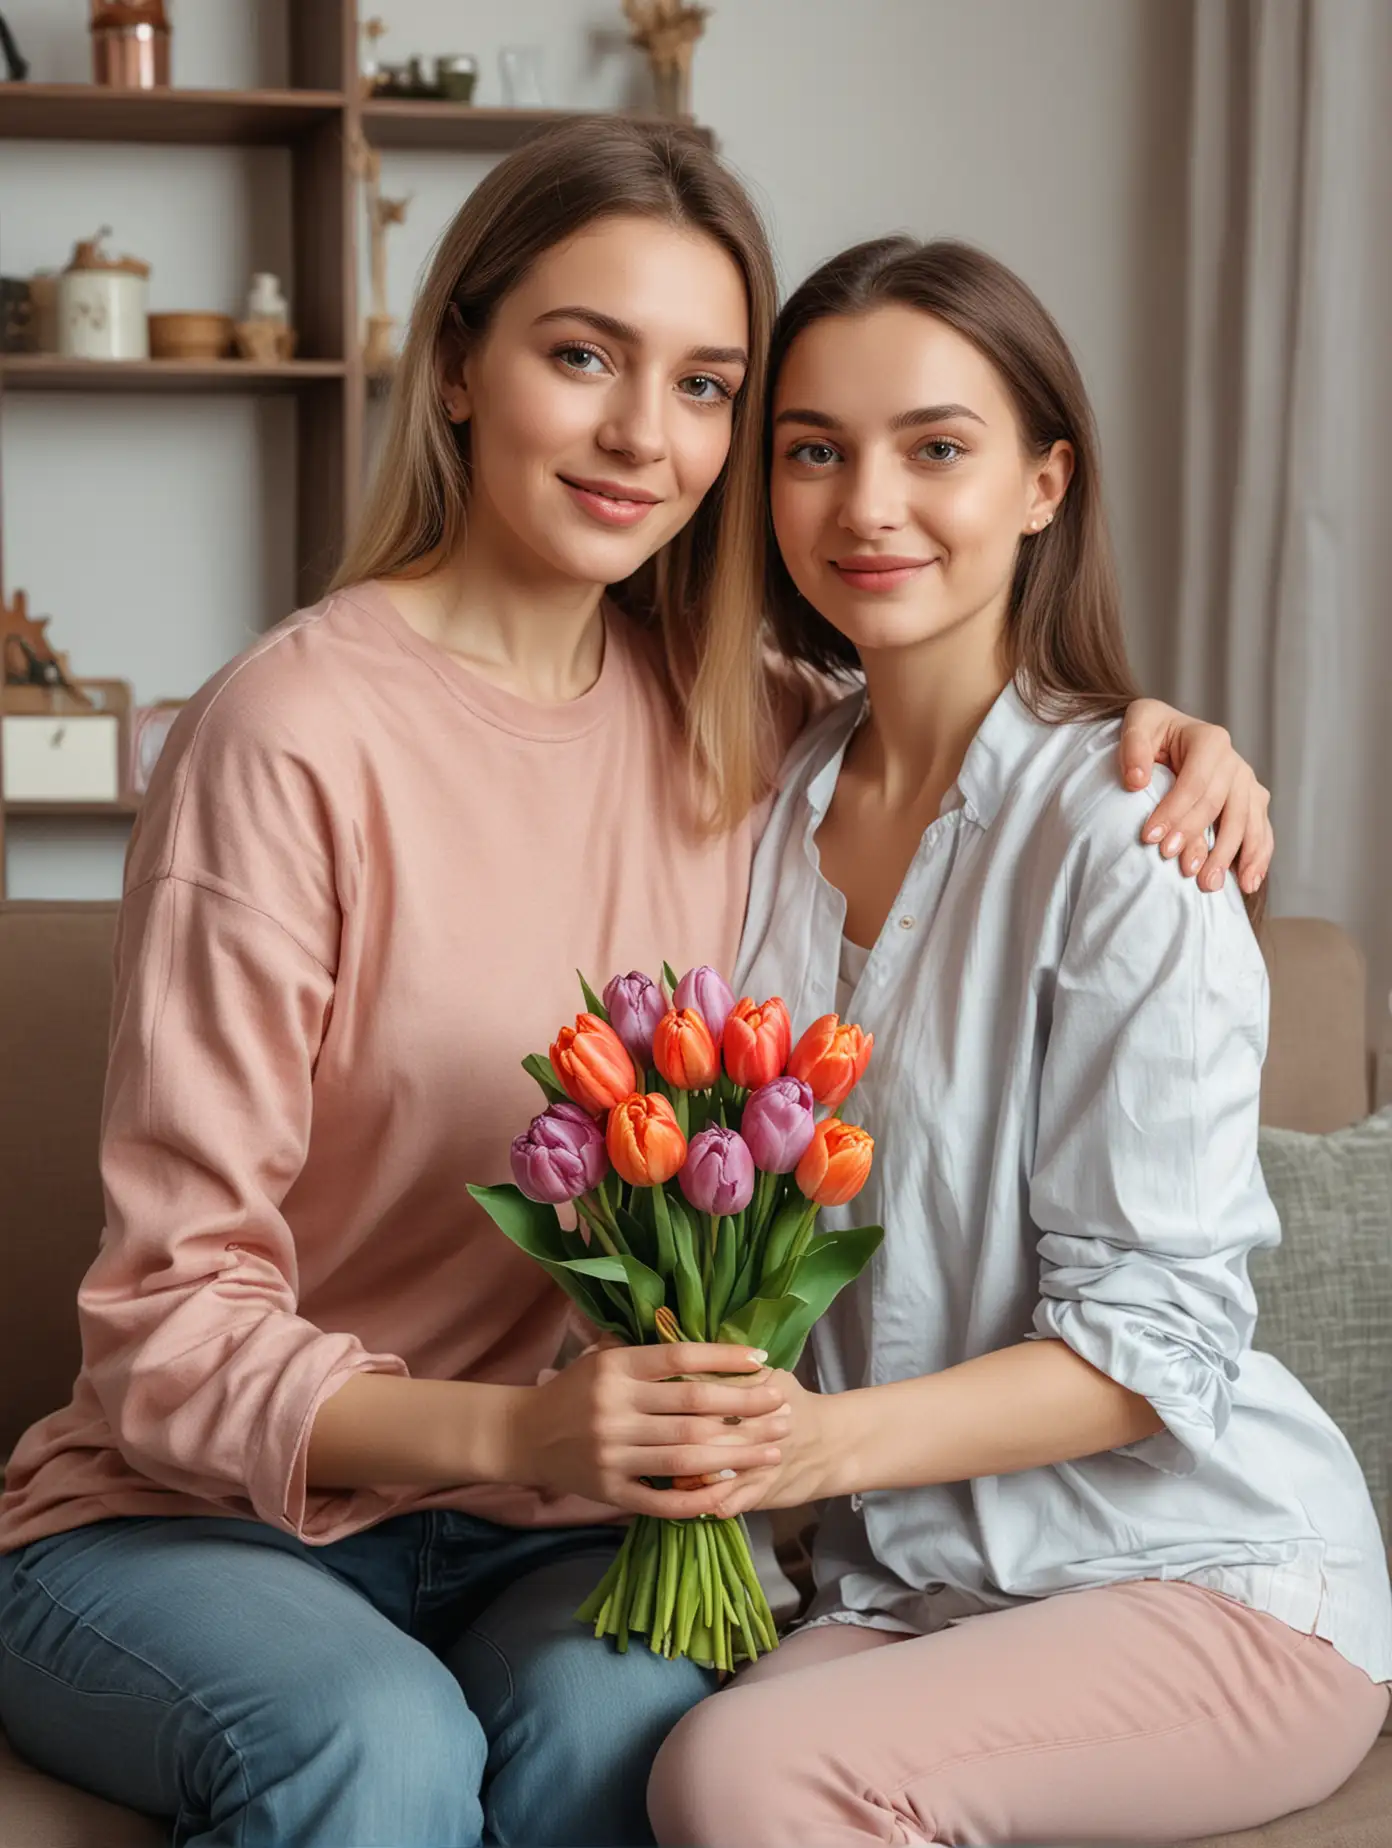 Ukrainian，young sexy girl with her mother sitting on the sofa at home and holding a flowers tulip bouquet for Mother's Day or women's day celebration, giving a gift box to an elderly senior person. Cute girl gives a present in the living room. Looking at the camera, concept of copy space.